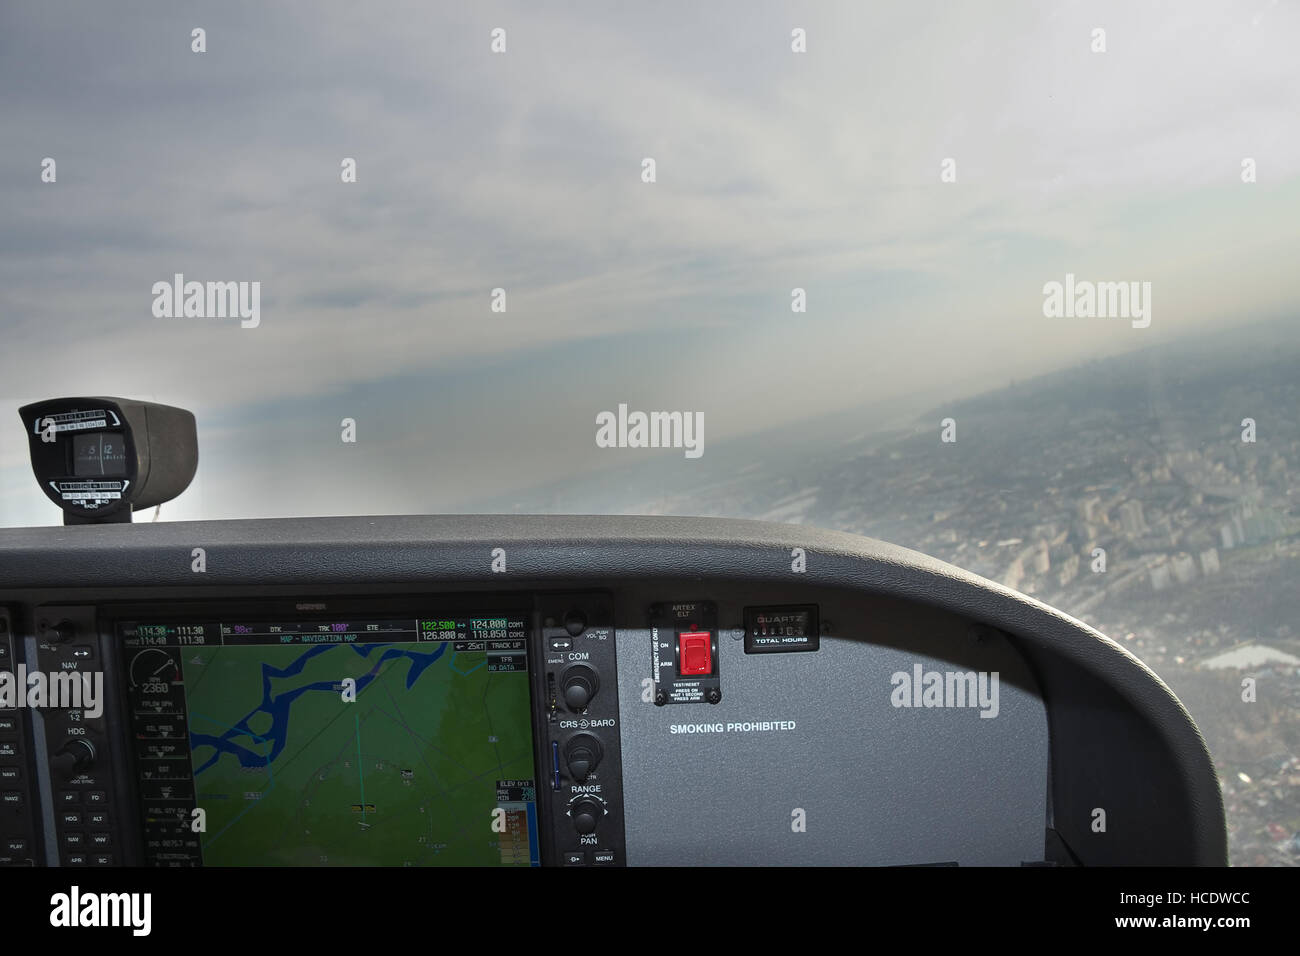 Kiev, Ukraine - November 12, 2010: View from the Cessna 172 Skyhawk during the flight over the city with cloudy weather conditions Stock Photo